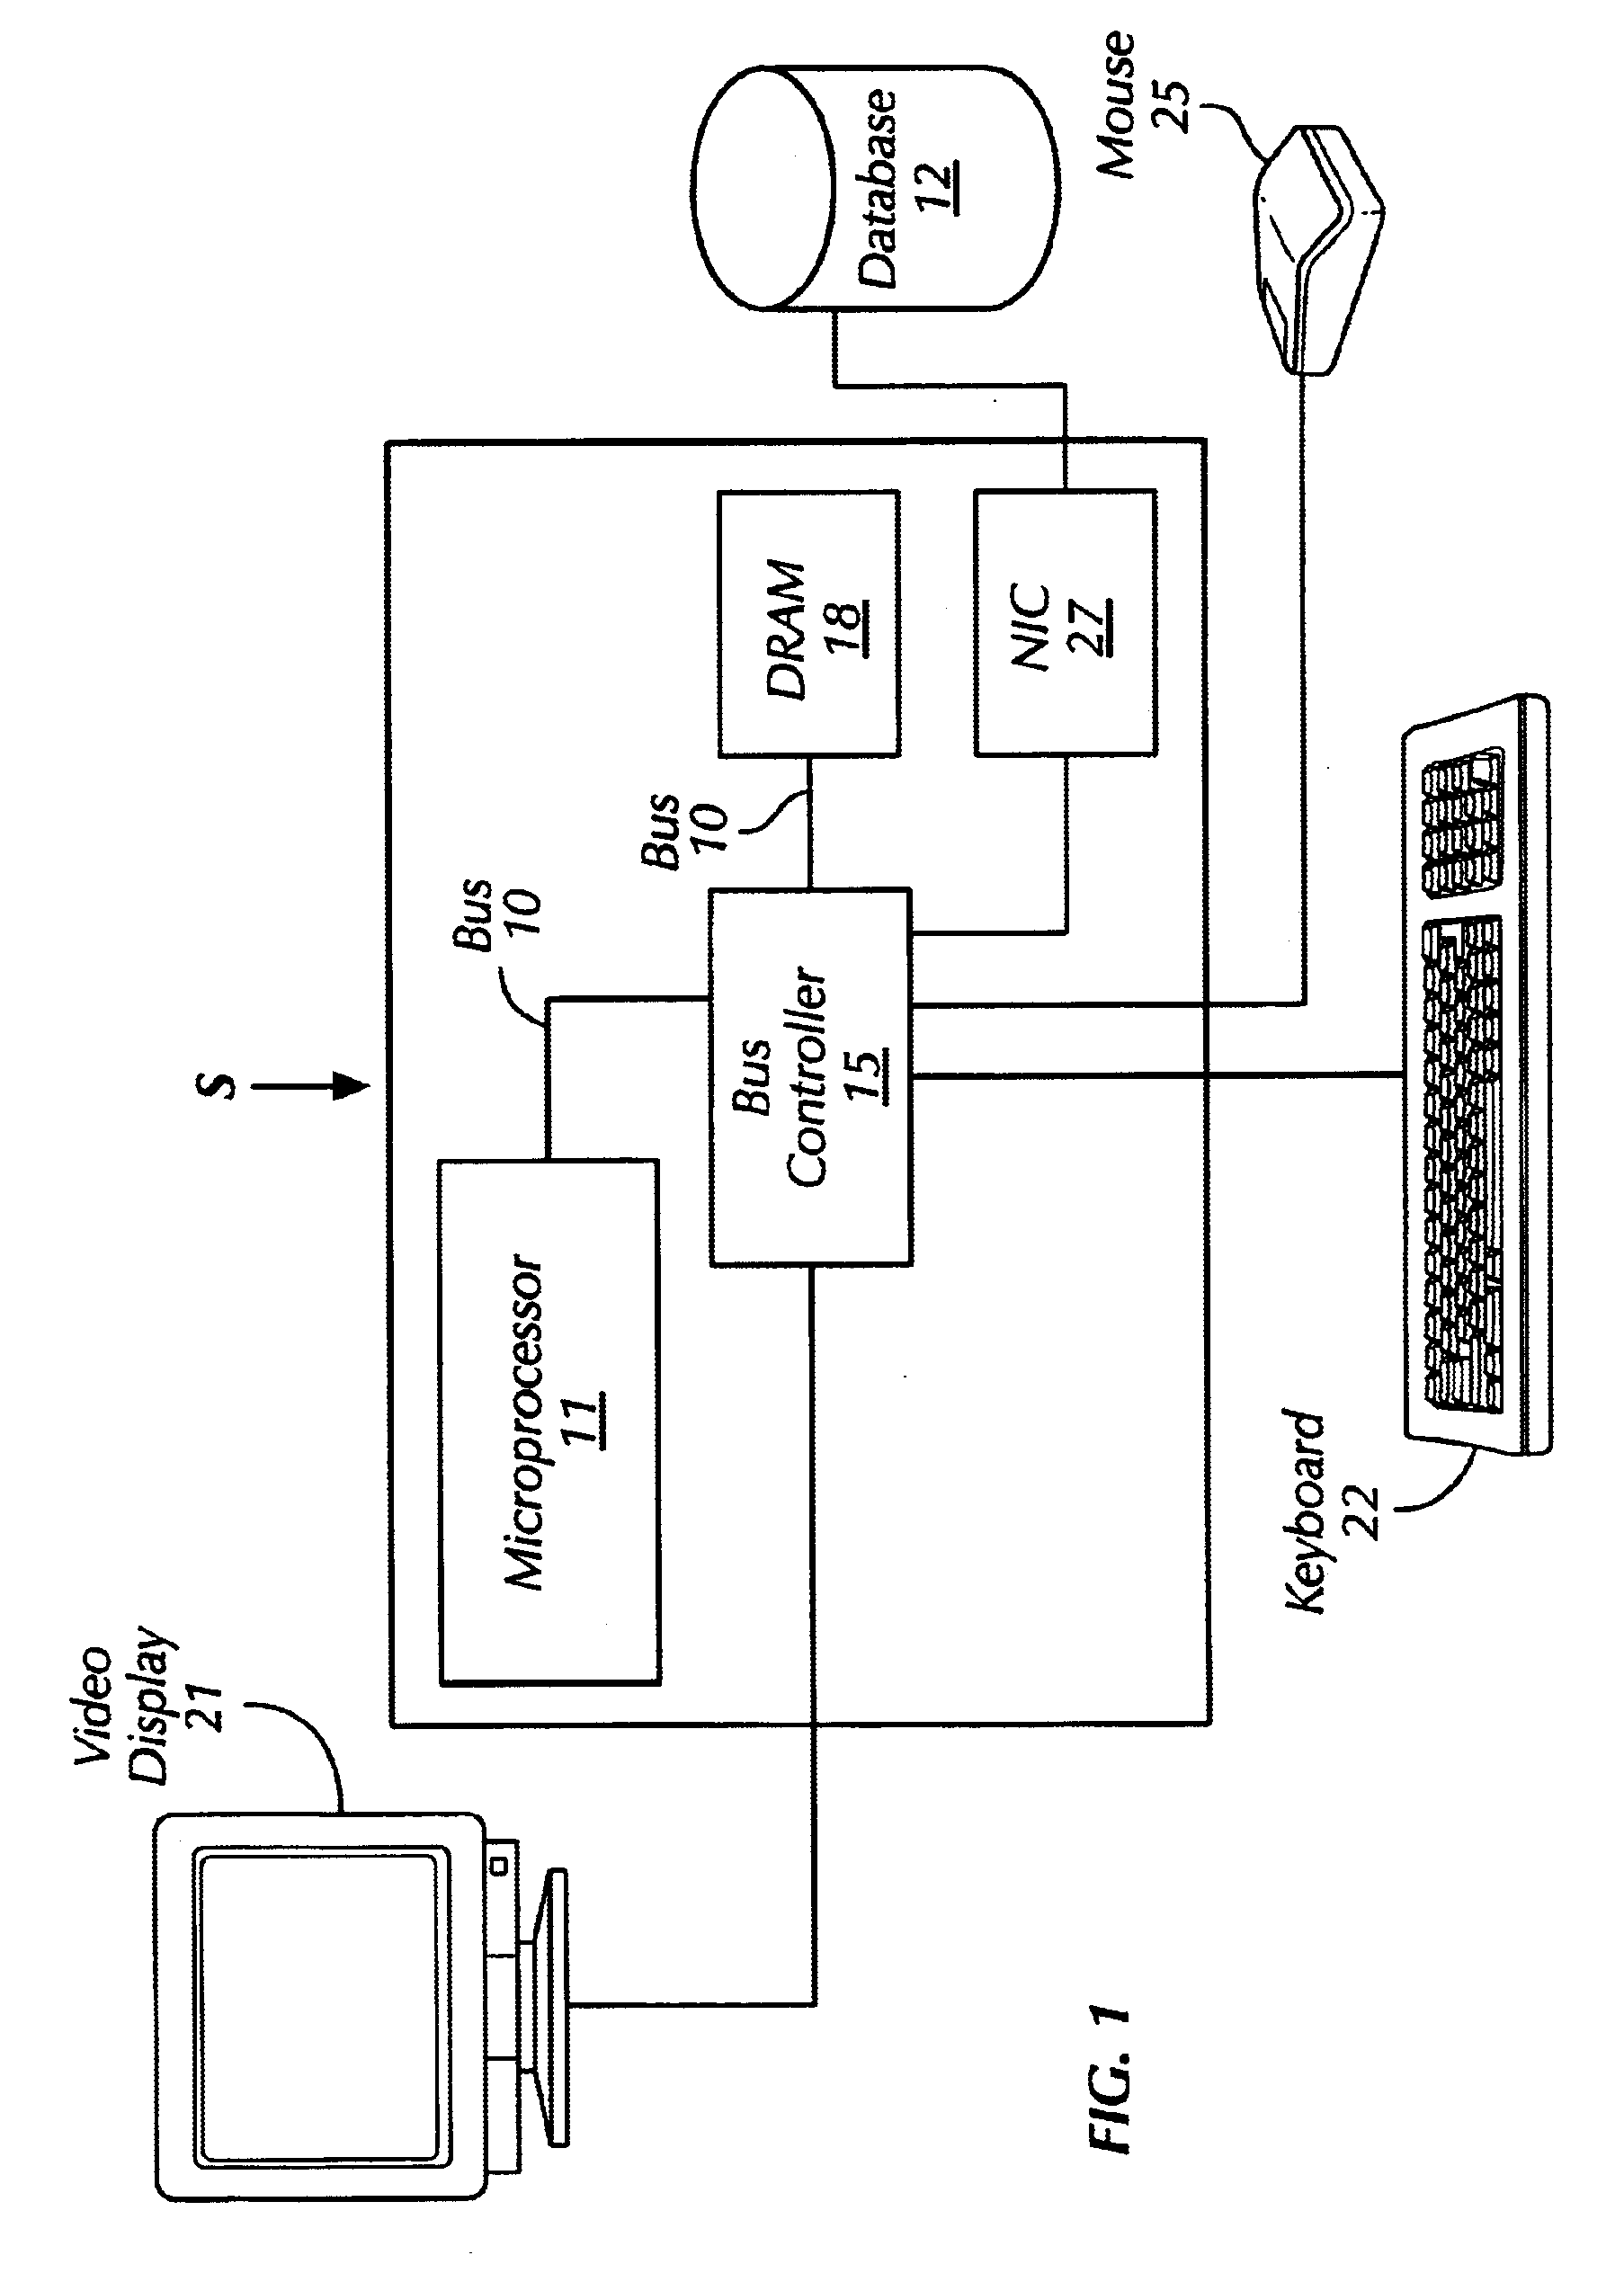 Methodology and graphical user interface for building logic synthesis command scripts using micro-templates